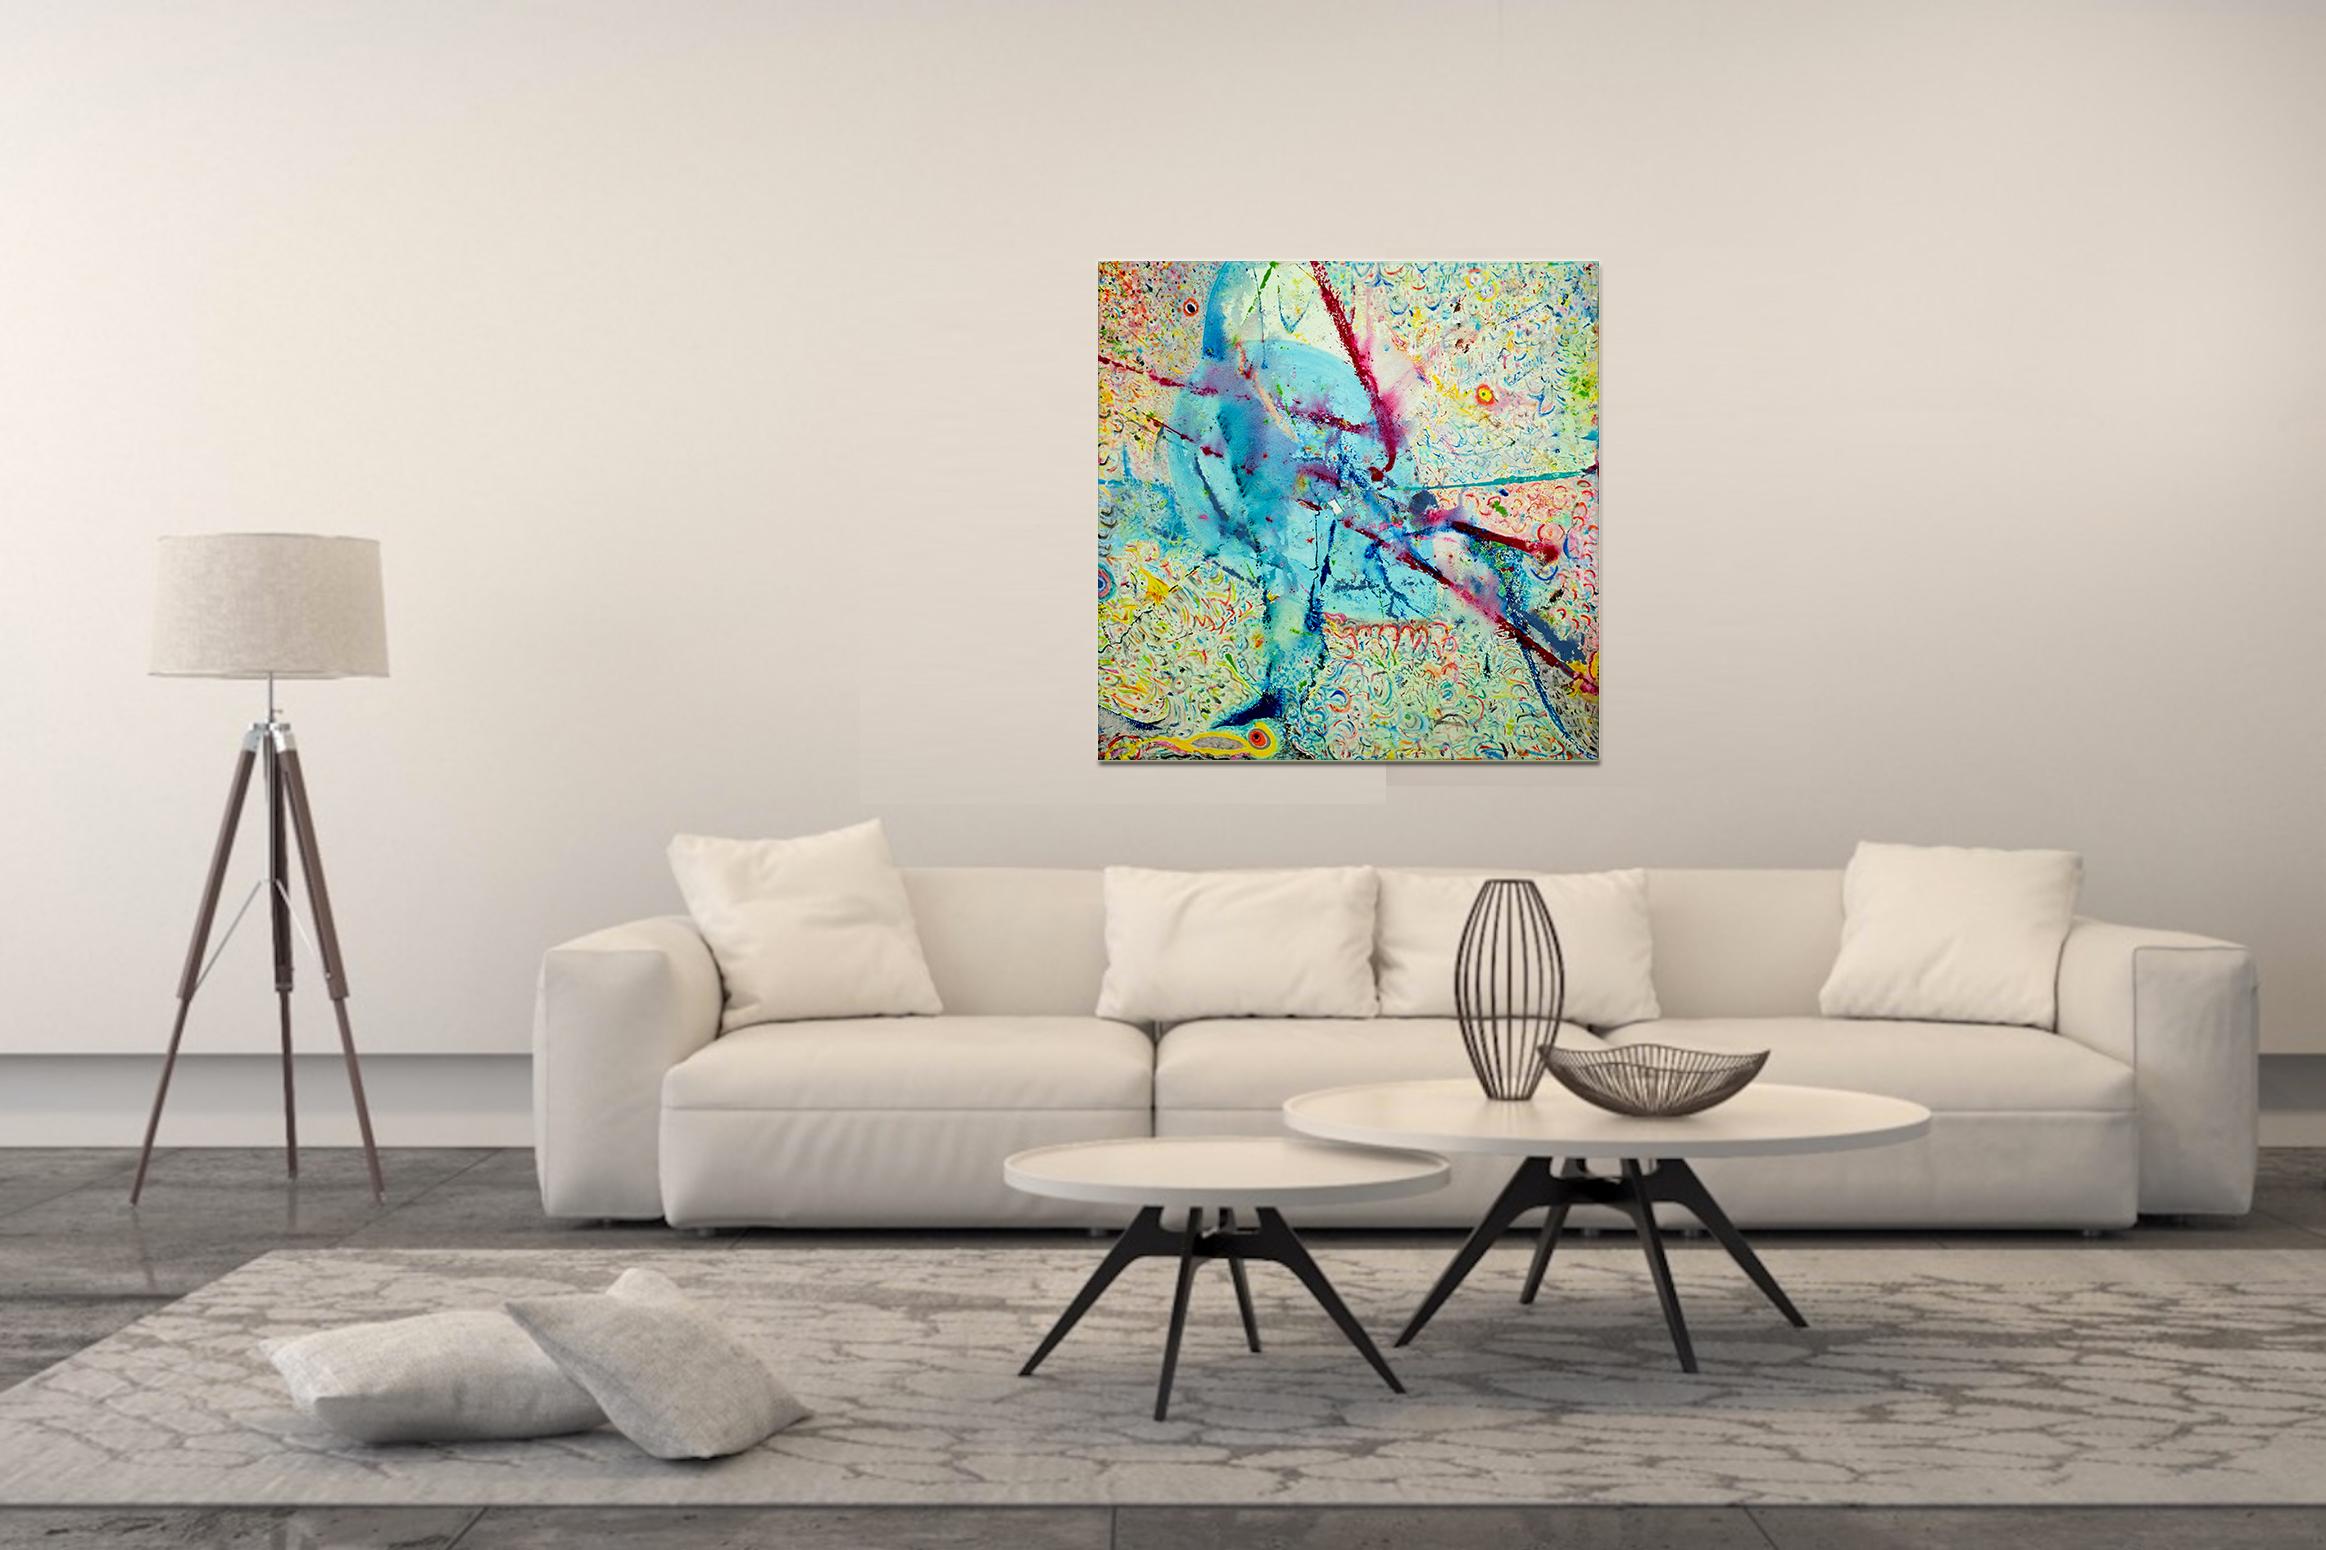 Artist: Detlef E. Aderhold

Medium: Mixed Media on Canvas

Edition: Original Abstract Painting in Turquoise, Green, Yellow, Blue, Red and Black


About the Artist:

Detlef E. Aderhold is a contemporary abstract painter from Germany.

